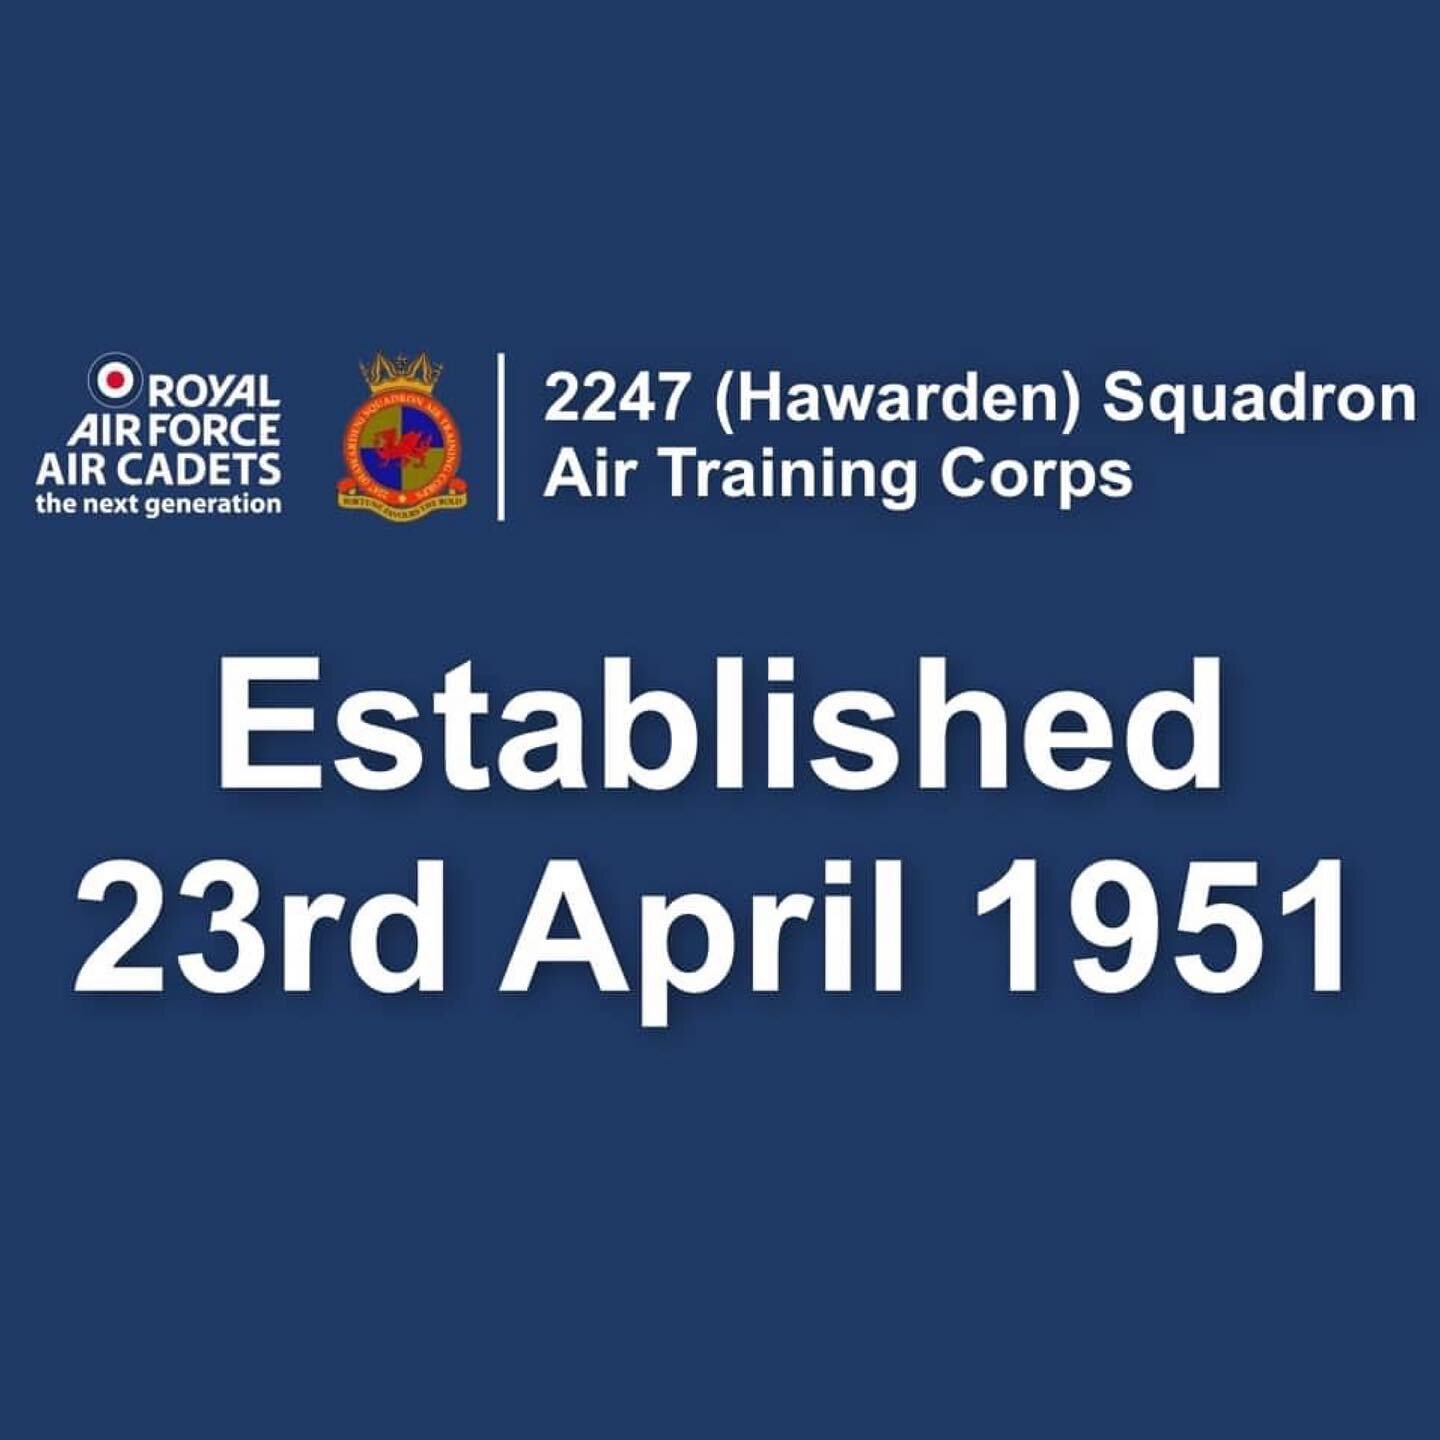 Today is our 70th Anniversary! 🎉🥳🎂

We were established as 2247 (County of Flint) Squadron on 23rd April 1951 and the rest - they say - is history! ⏳

Unfortunately the ongoing situation has scuppered our plans to celebrate, but we hope to do so j